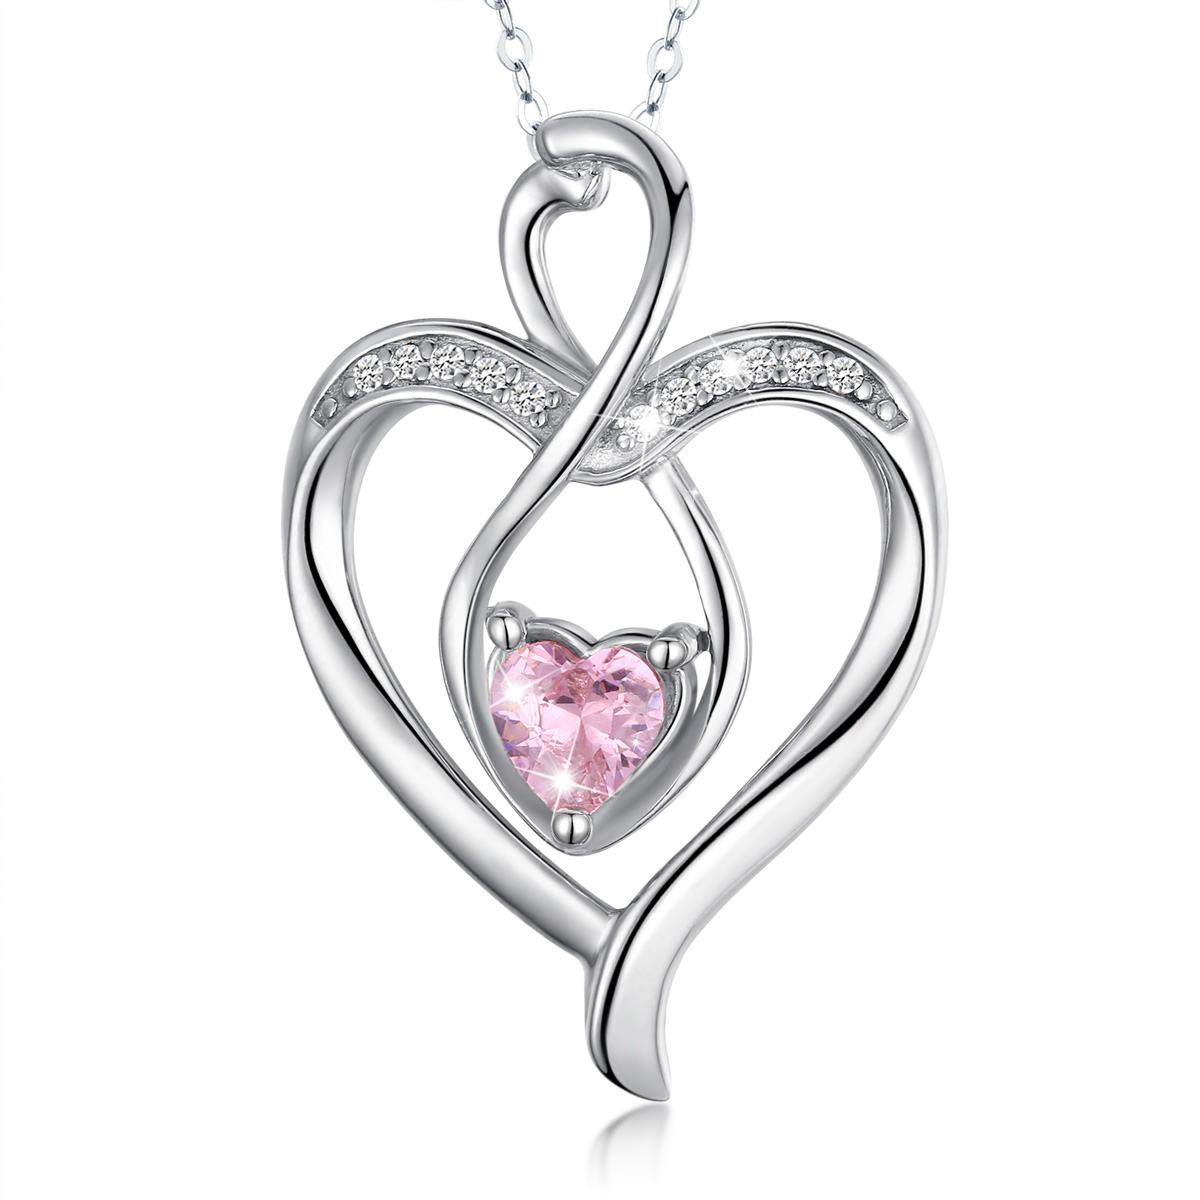 S925 Sterling Silver Rhodium Plated Jewelry Personalized Infinity Pendant Pink CZ Diamond Necklace